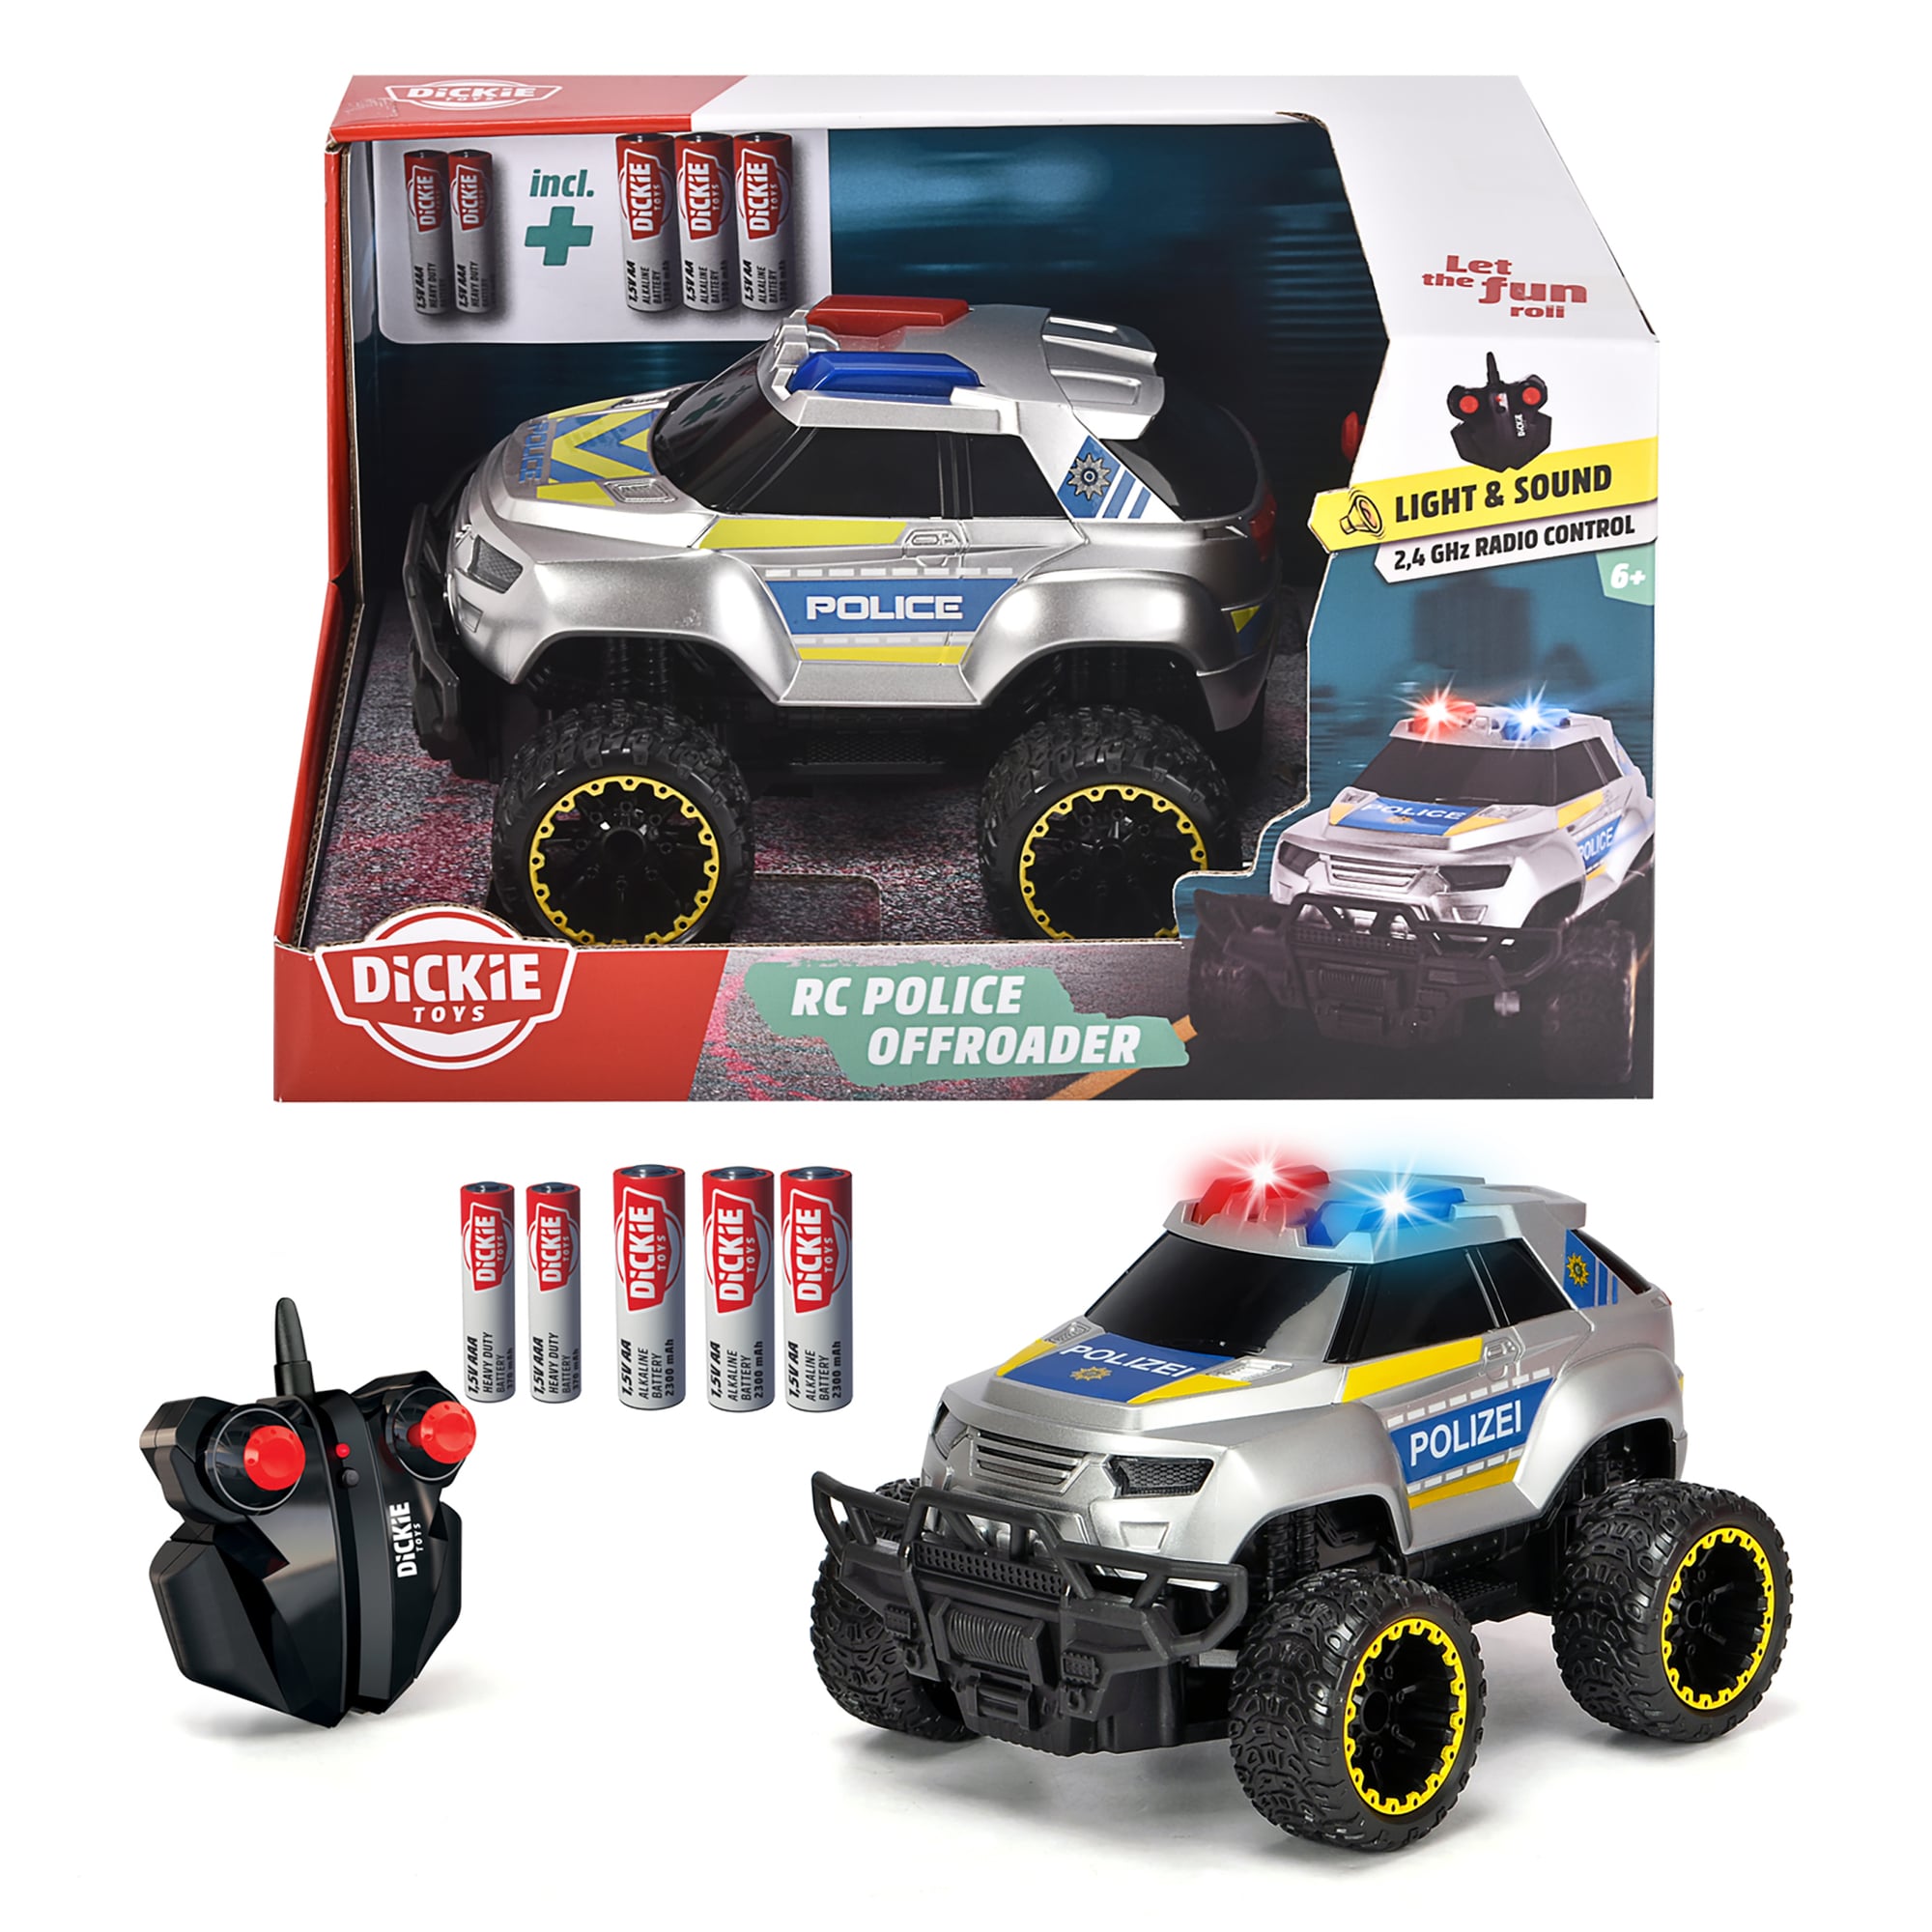 Dickie Toys products » Compare prices and see offers now